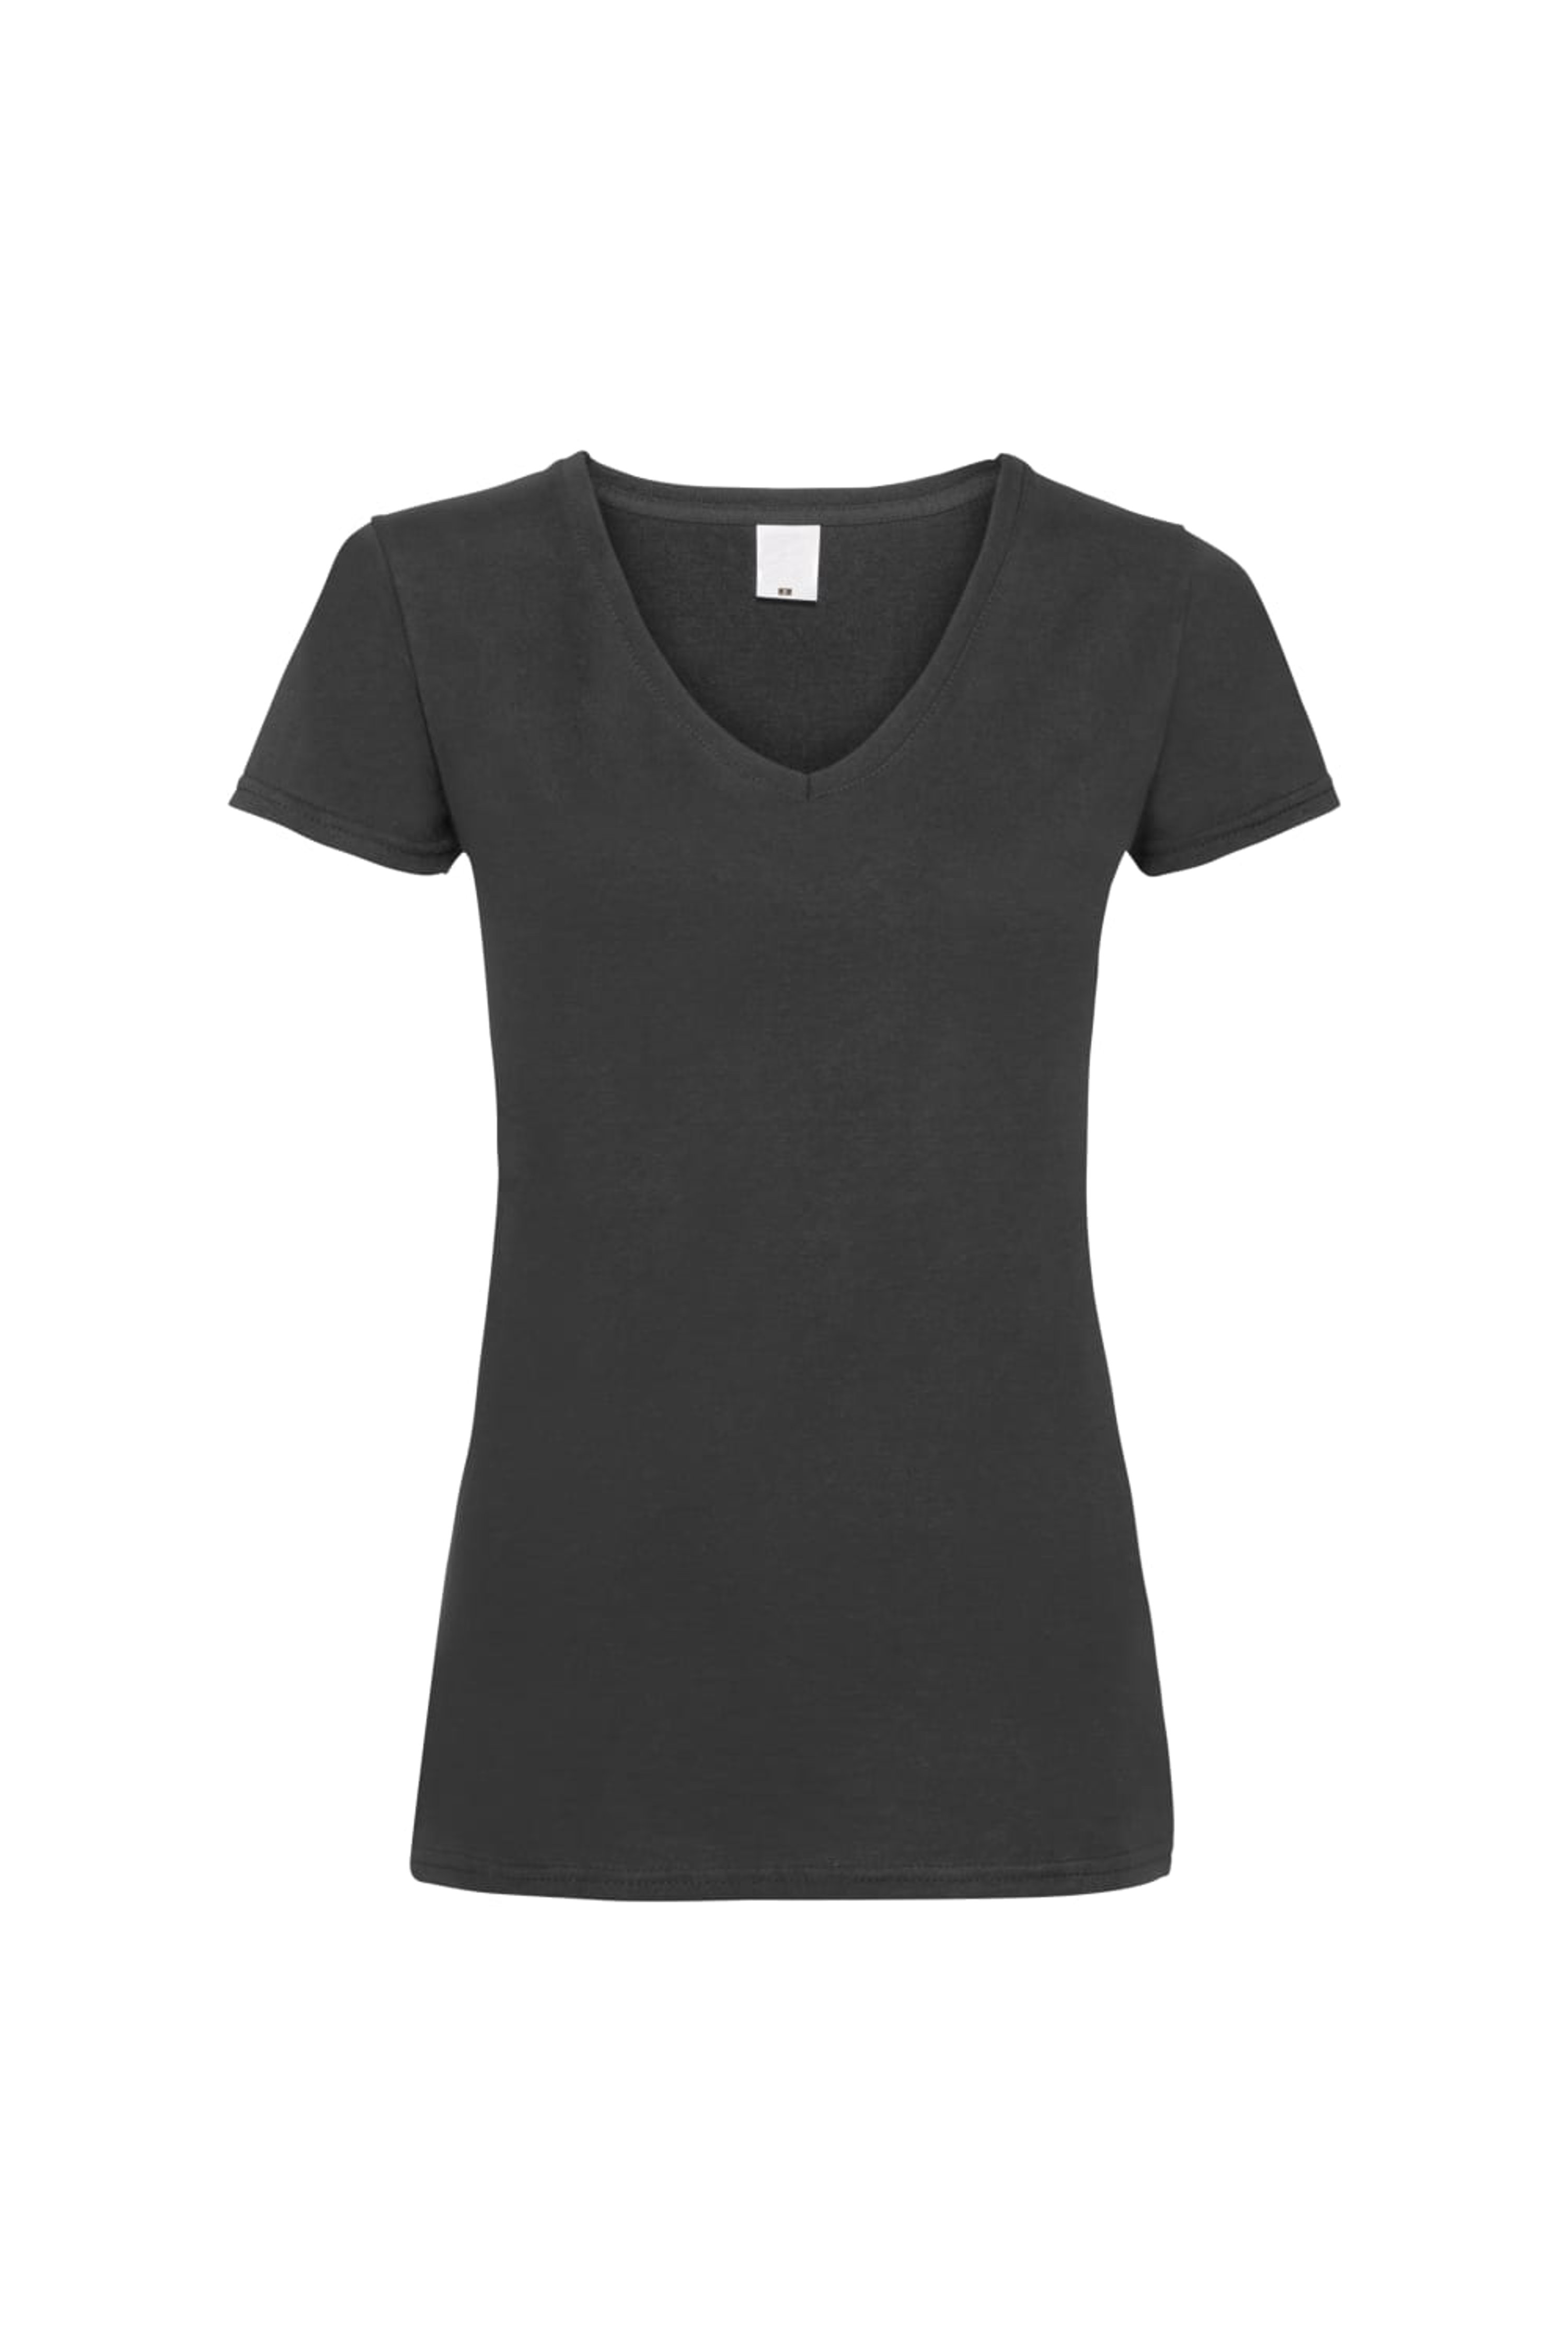 UNIVERSAL TEXTILES UNIVERSAL TEXTILES WOMENS/LADIES VALUE FITTED V-NECK SHORT SLEEVE CASUAL T-SHIRT (PITCH BLACK)